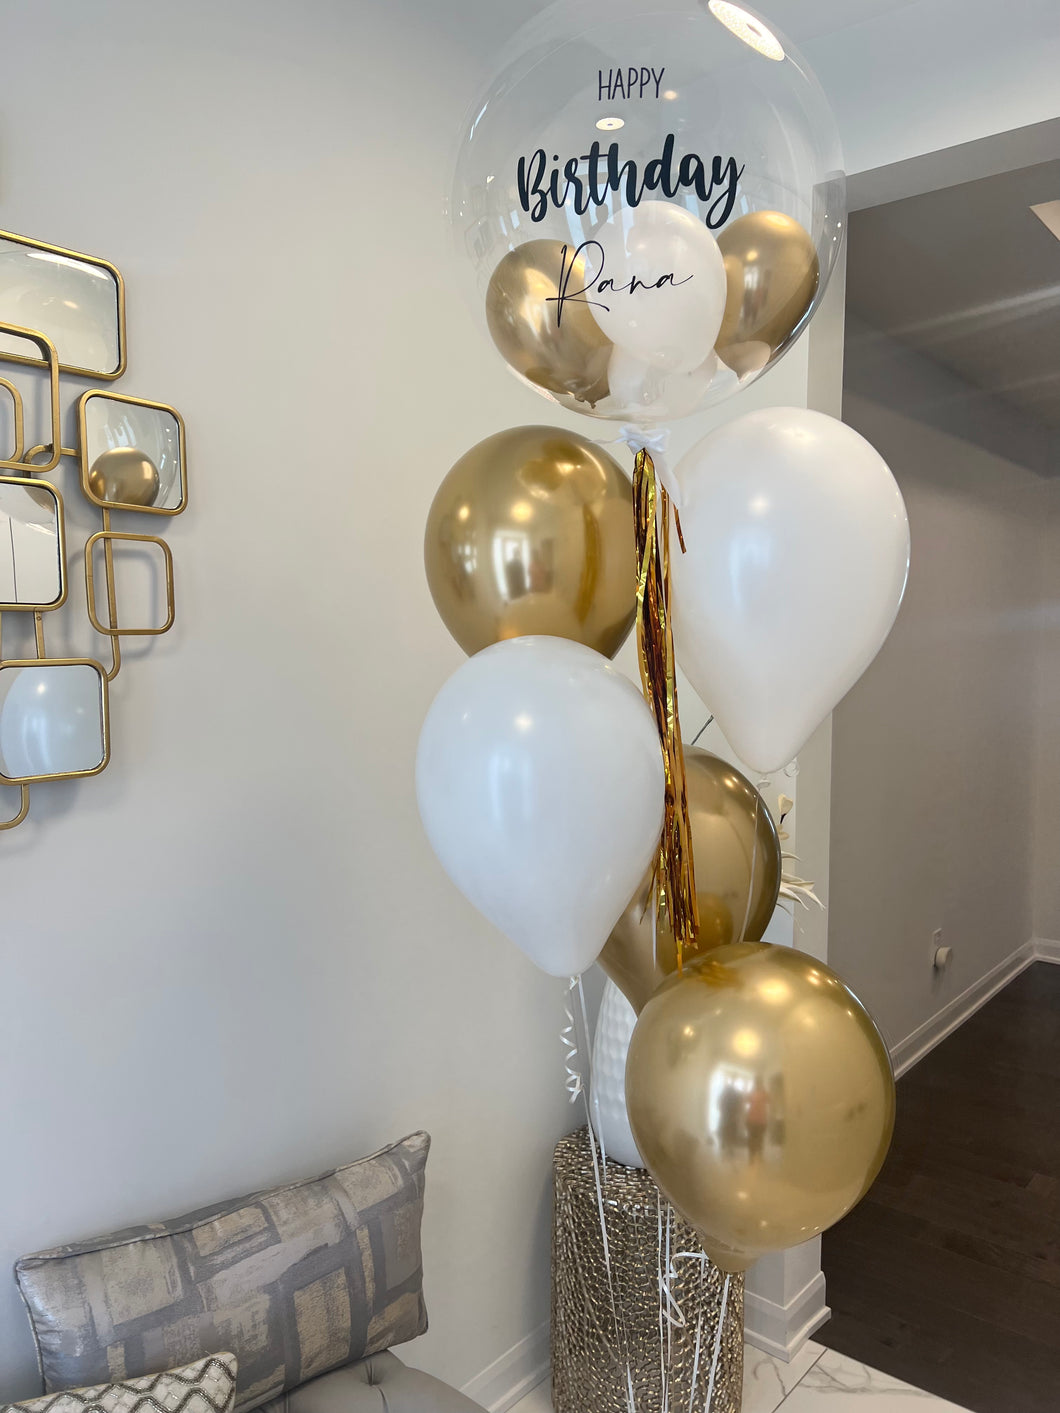 Customized Bubble Balloon filled with helium